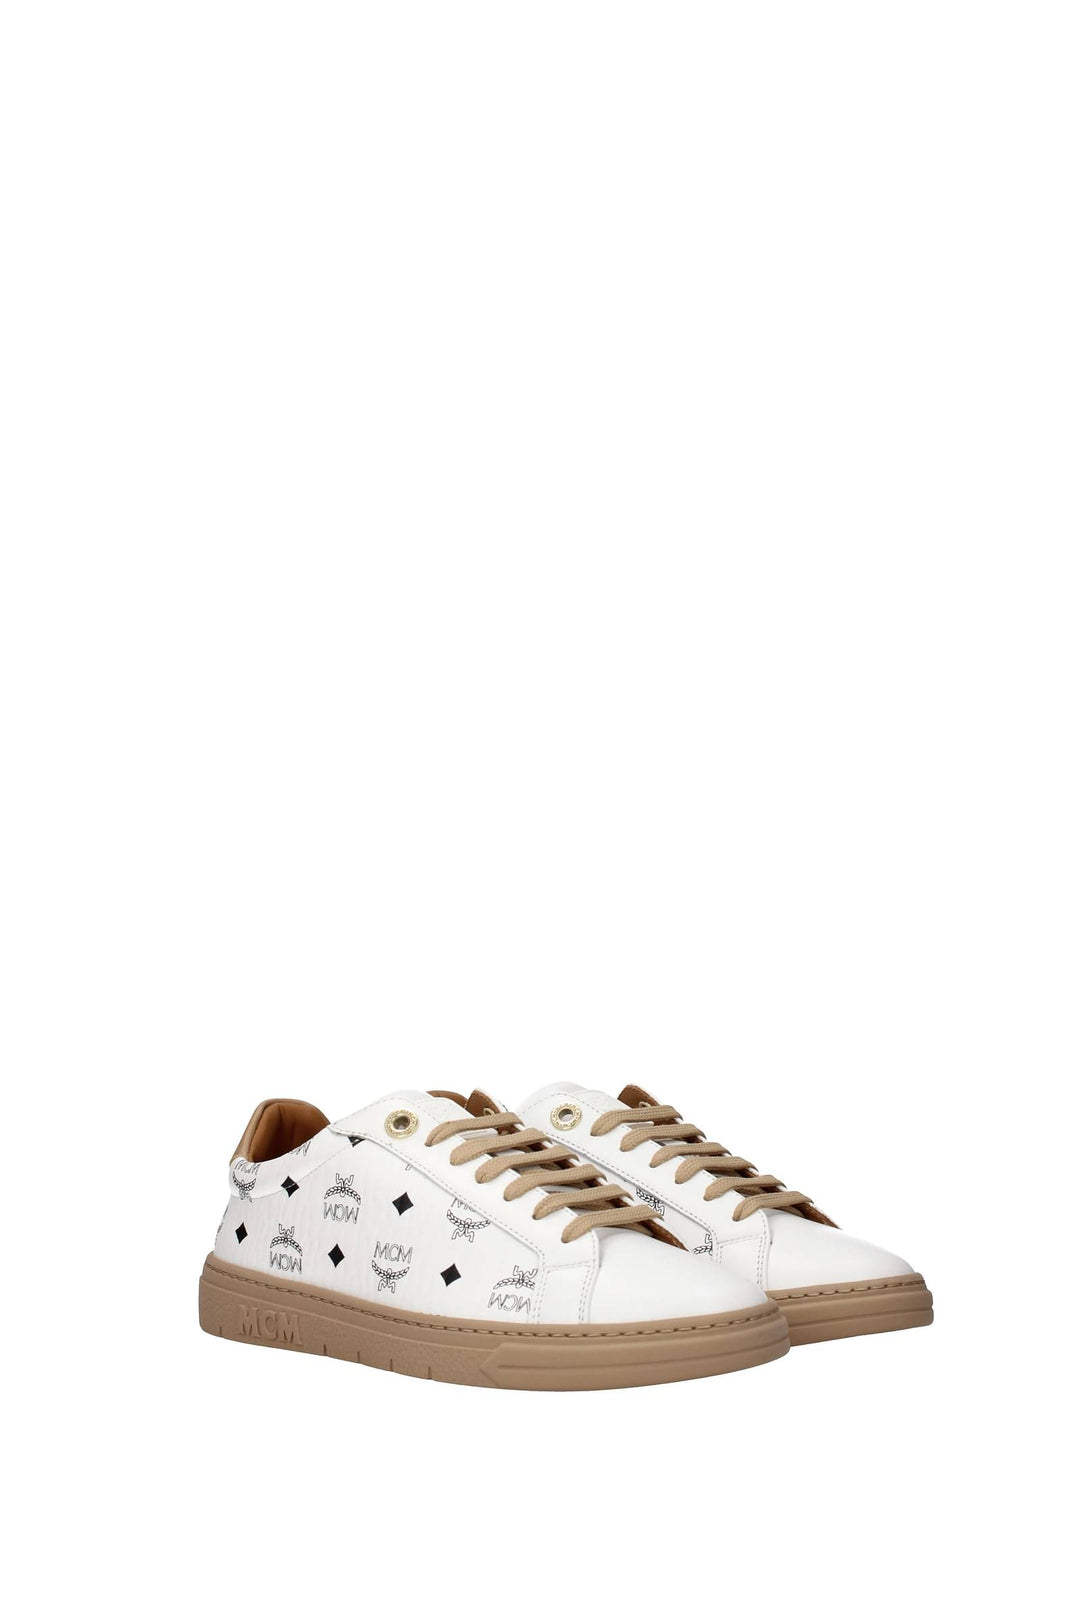 Sneakers Pelle Bianco Mare - MCM - Donna